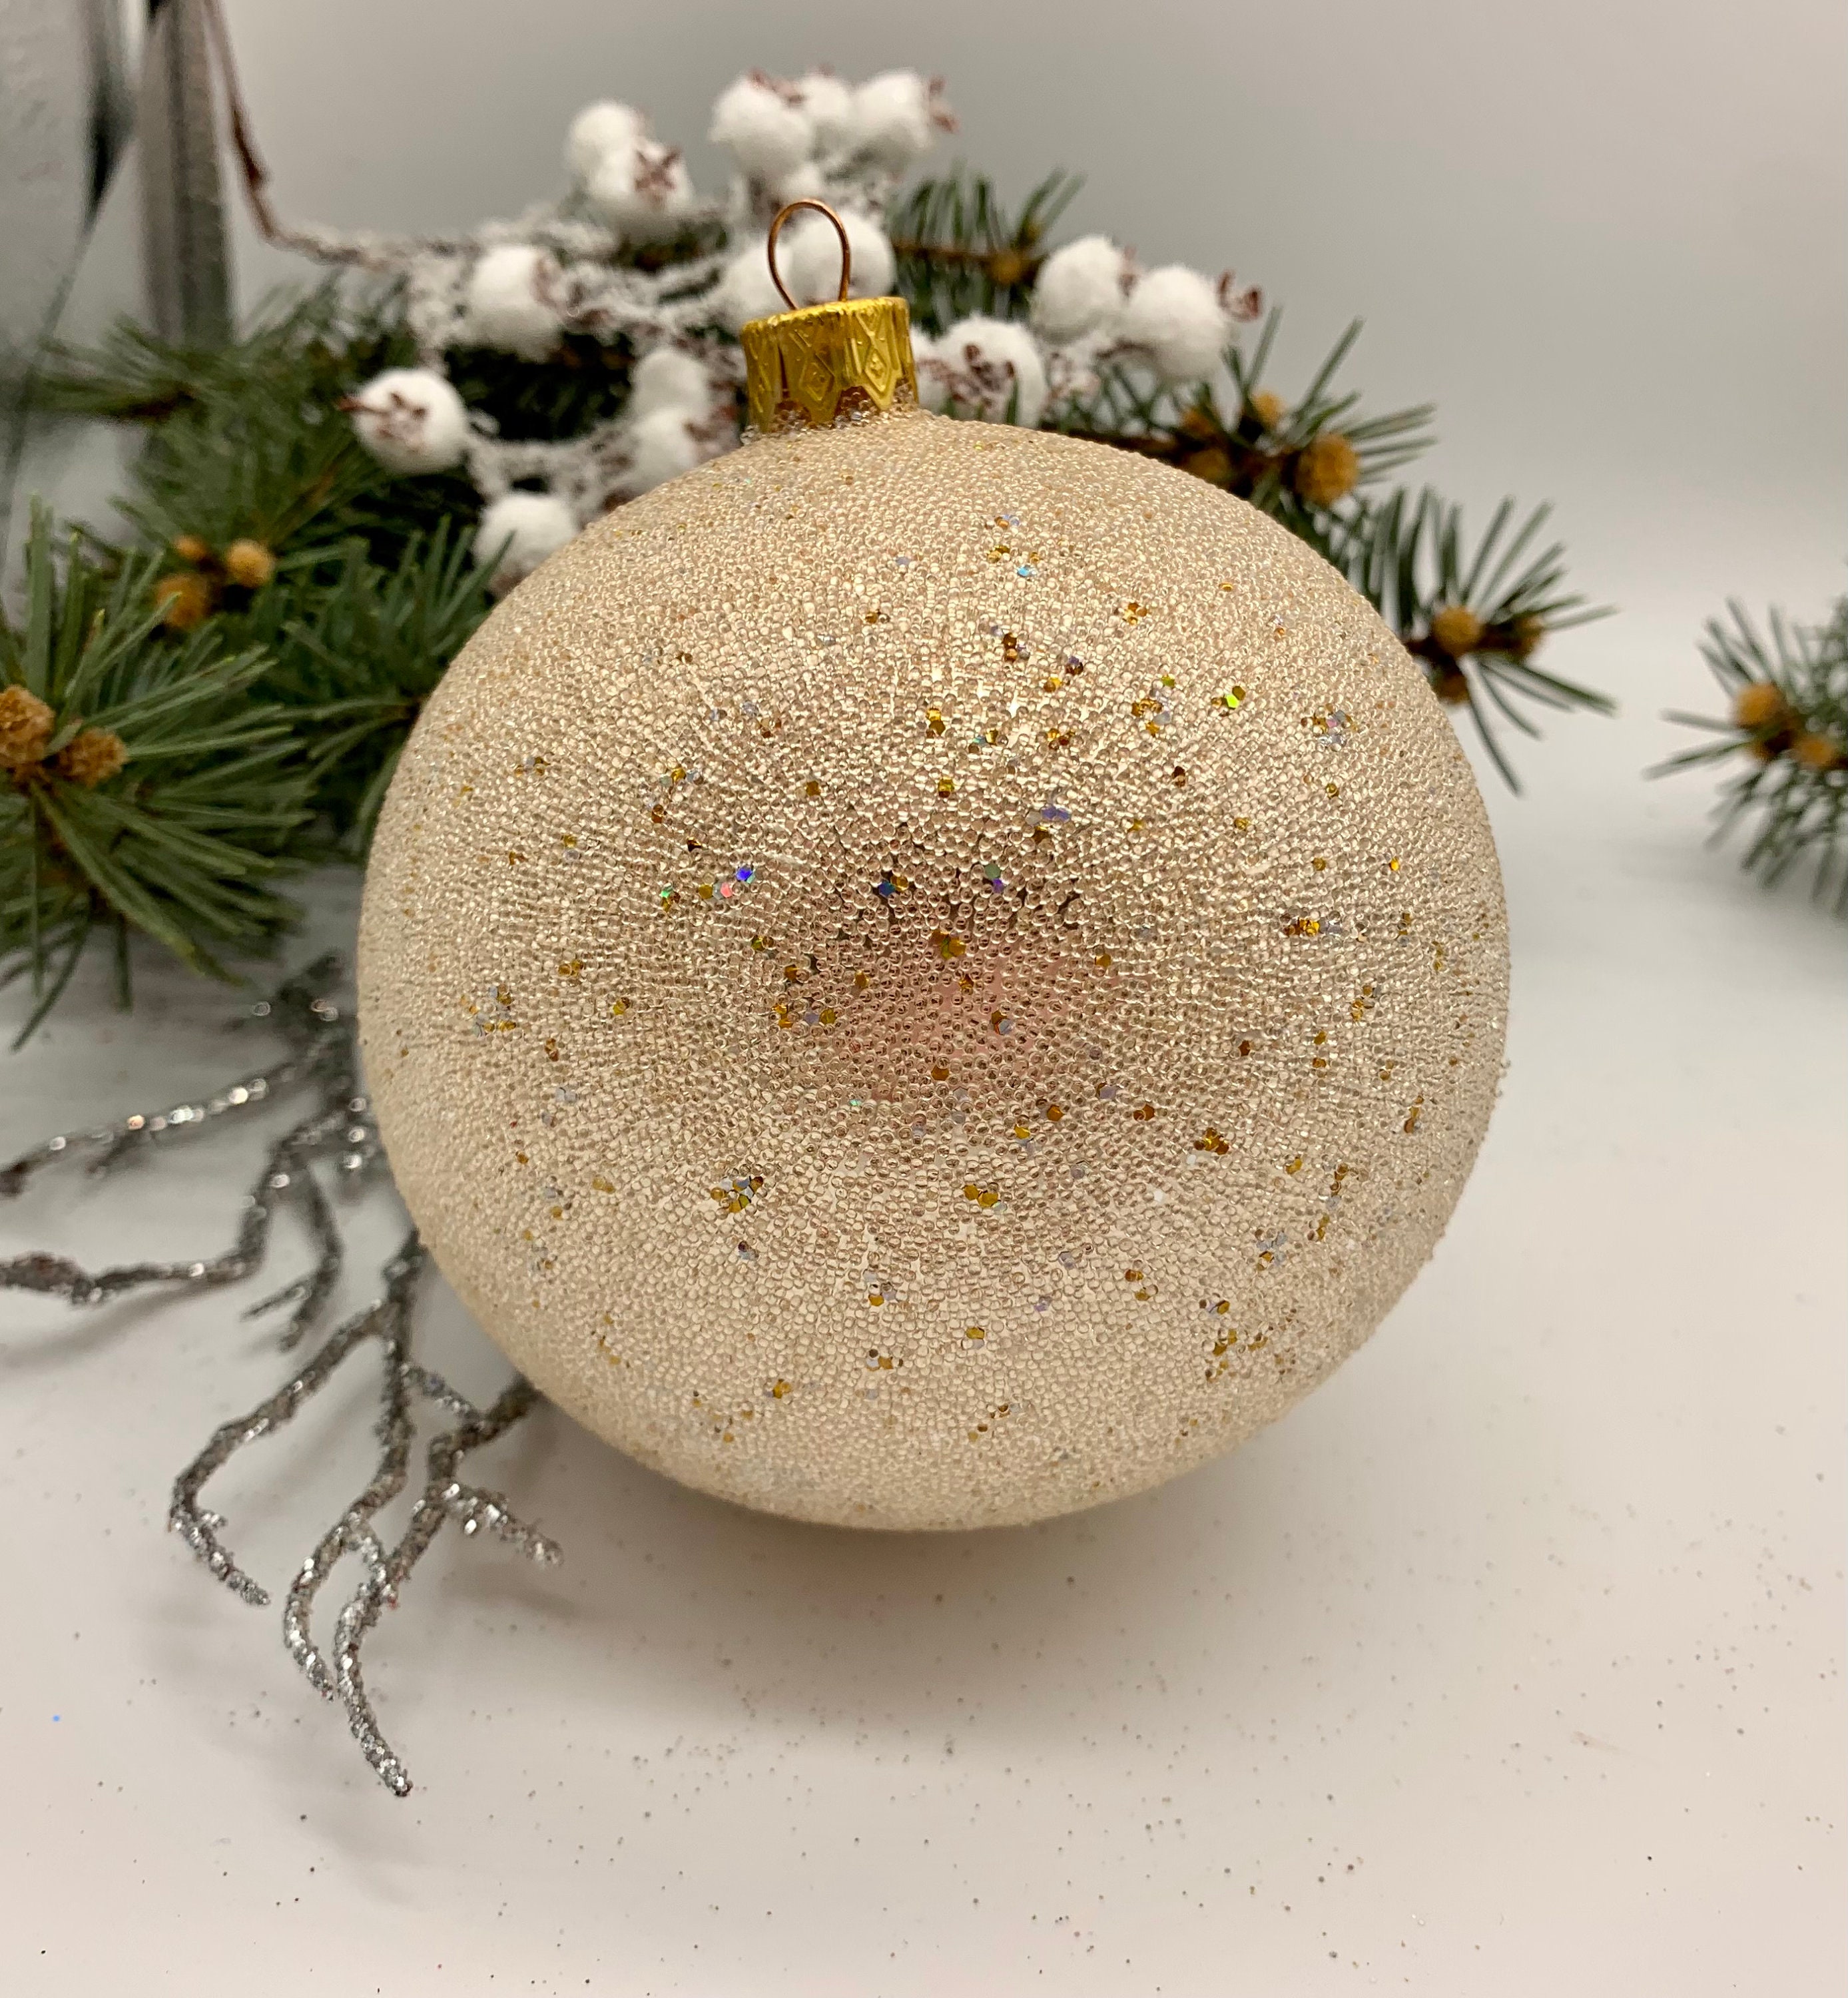 Giant Glitter Ball ornaments for holiday displays up to 84 diameter.